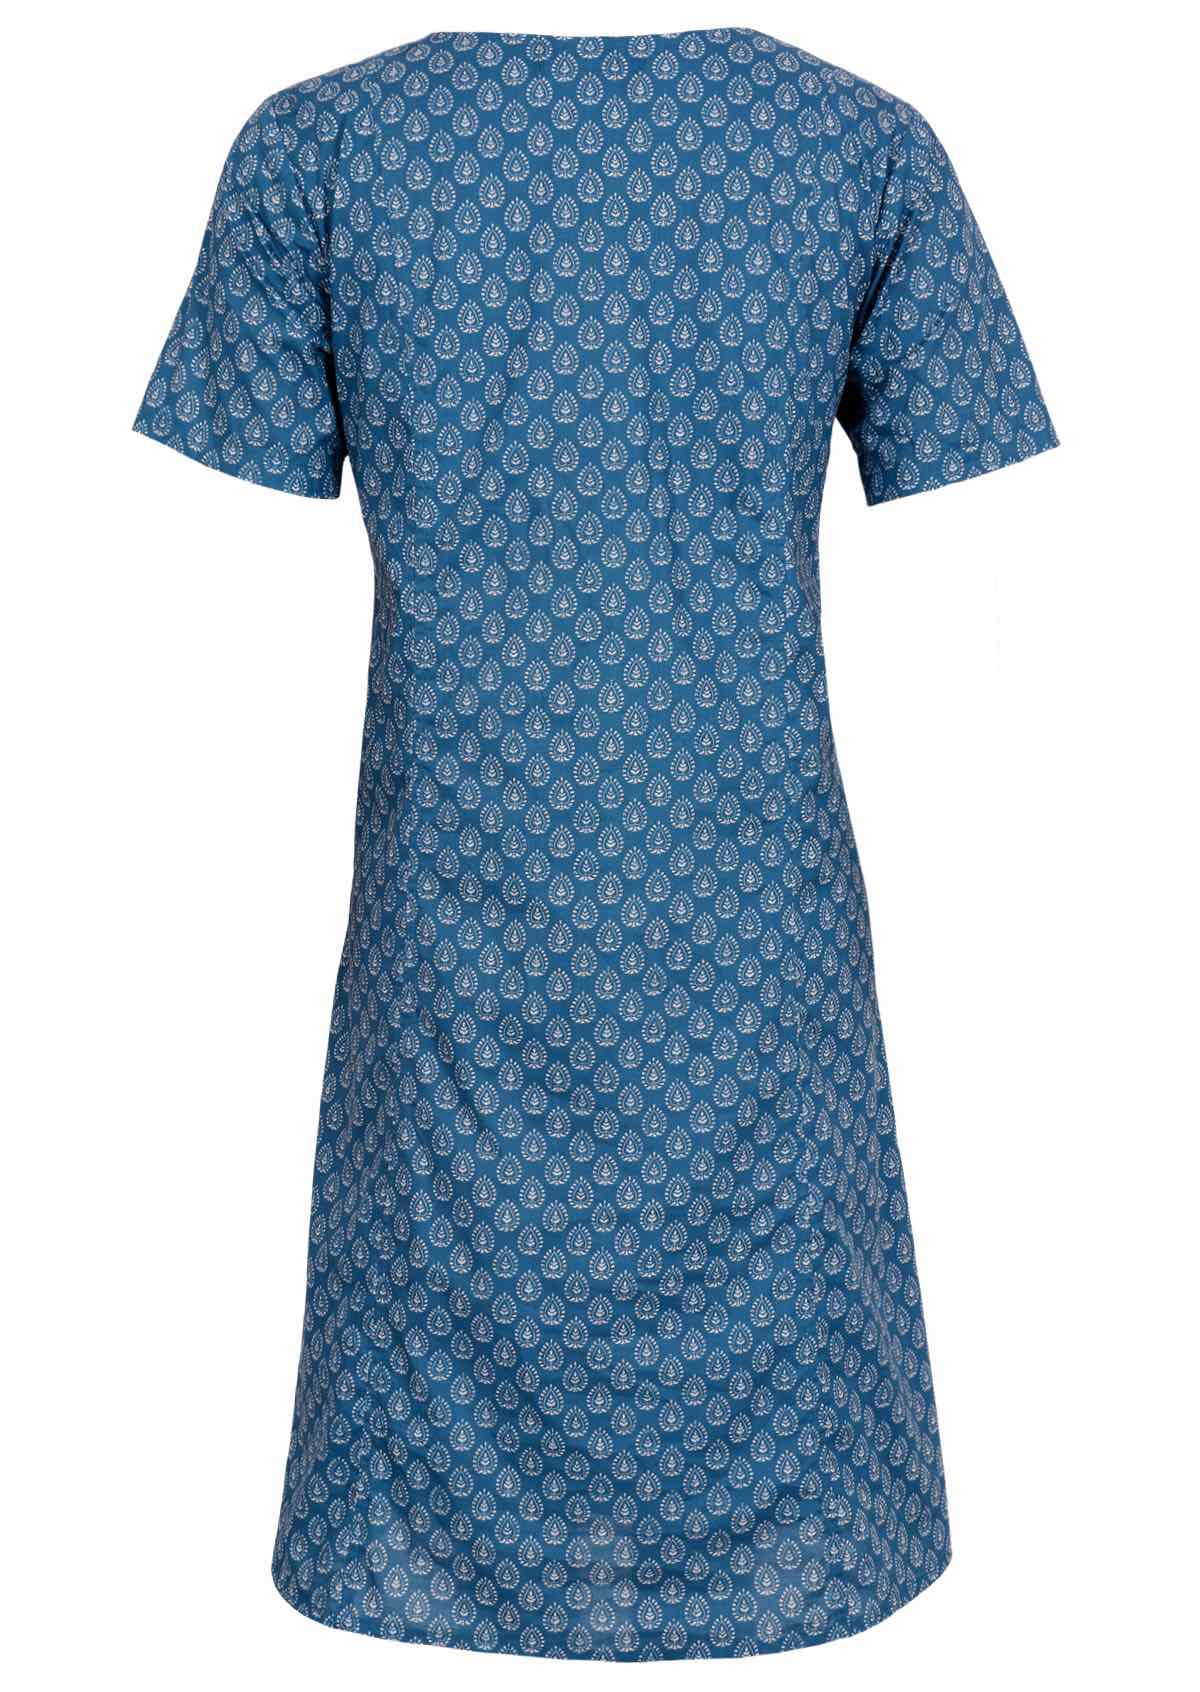 Integrated pockets with pin tucks give this 100% cotton dress a stylish silhouette. 